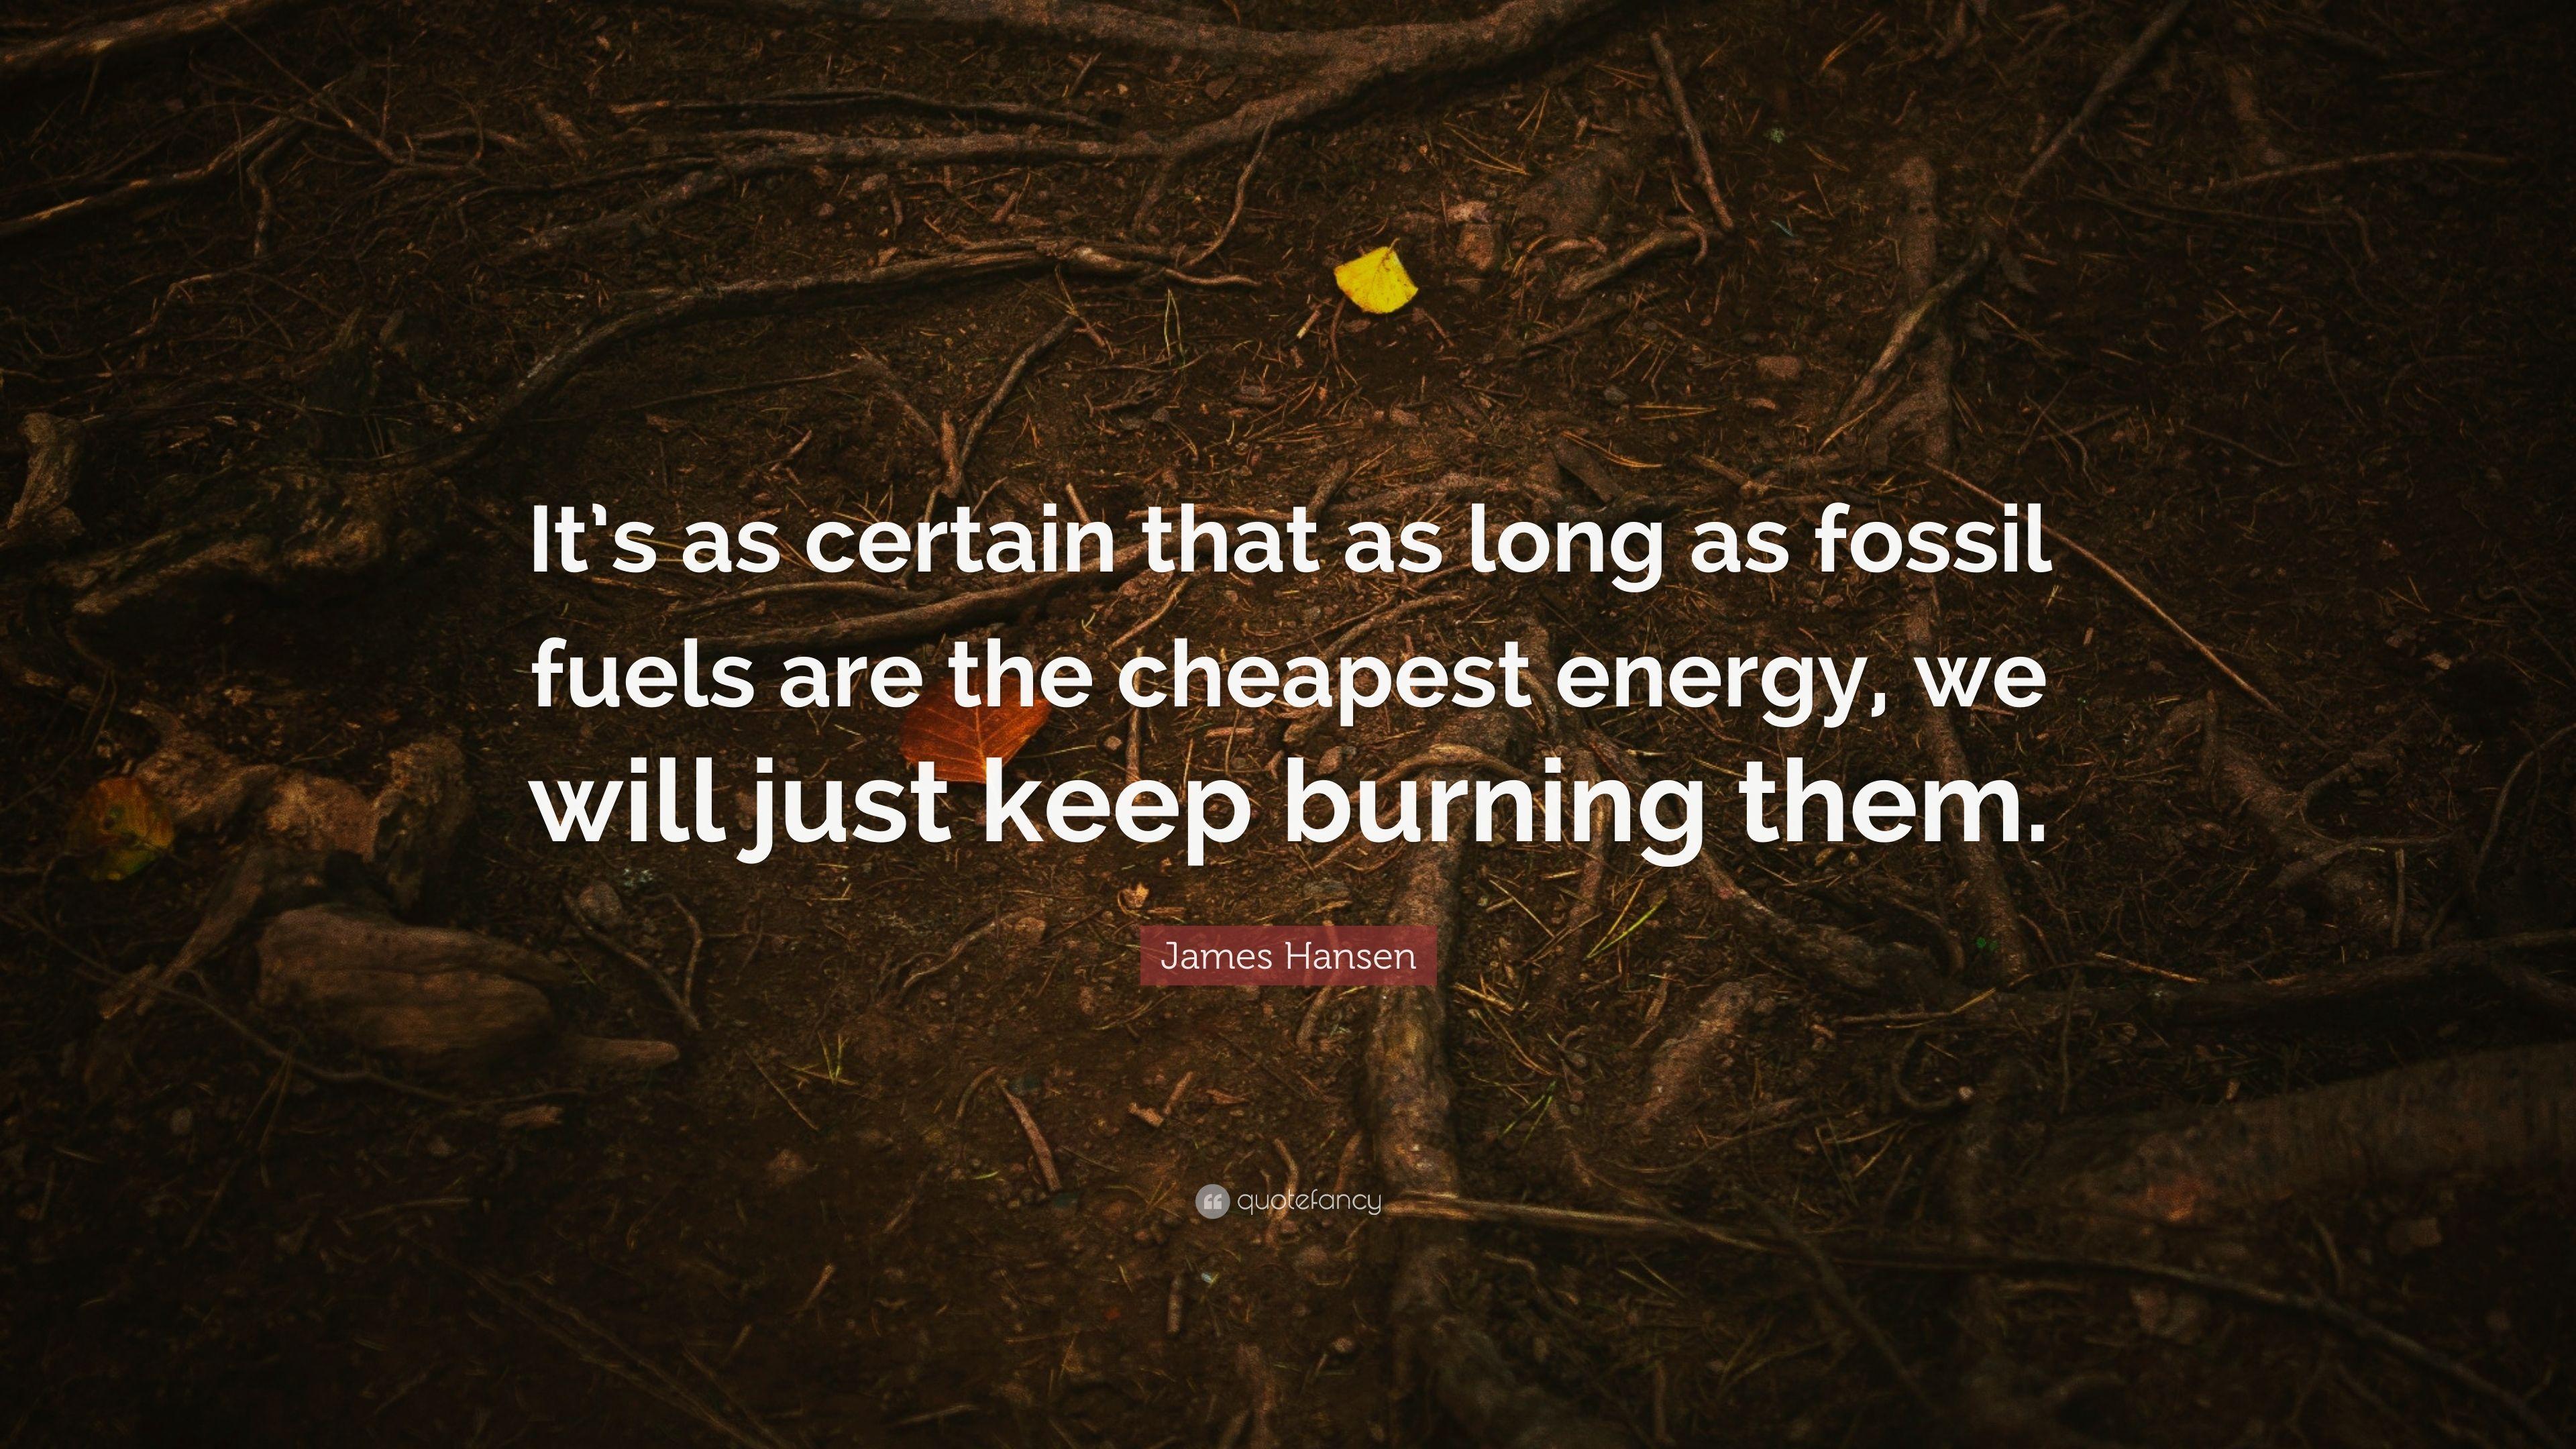 James Hansen Quote: “It's as certain that as long as fossil fuels